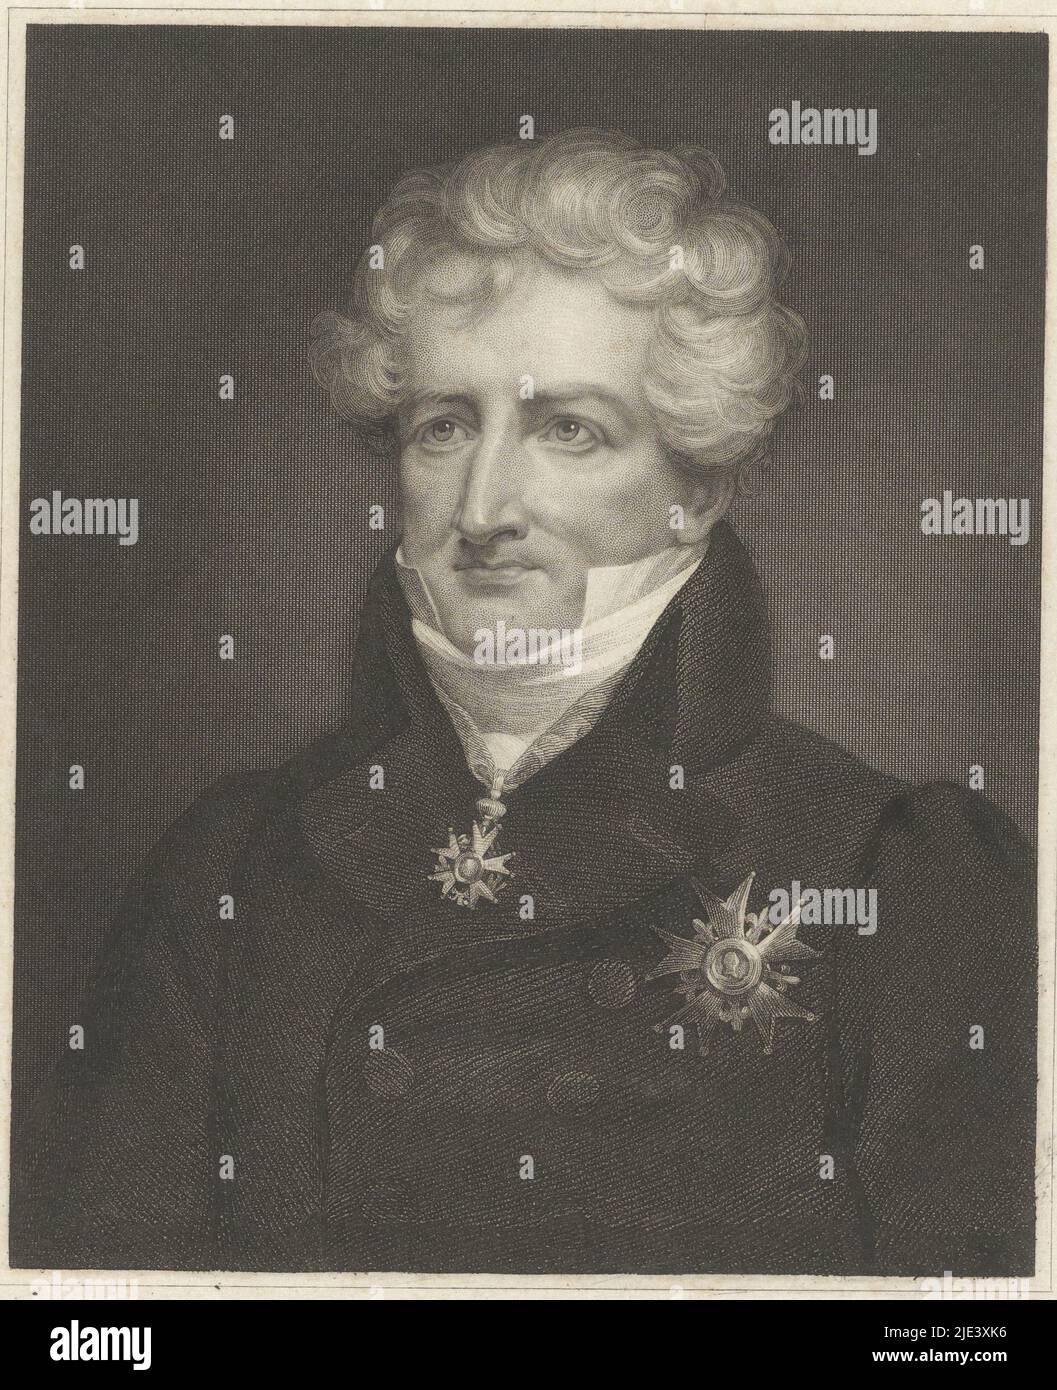 Portrait of Georges Cuvier, James Thomson, 1833, print maker: James Thomson, (mentioned on object), publisher: Charles Knight, (mentioned on object), Society for the Diffusion of Useful Knowledge, (mentioned on object), London, 1833, paper, engraving, h 272 mm - w 186 mm Stock Photo